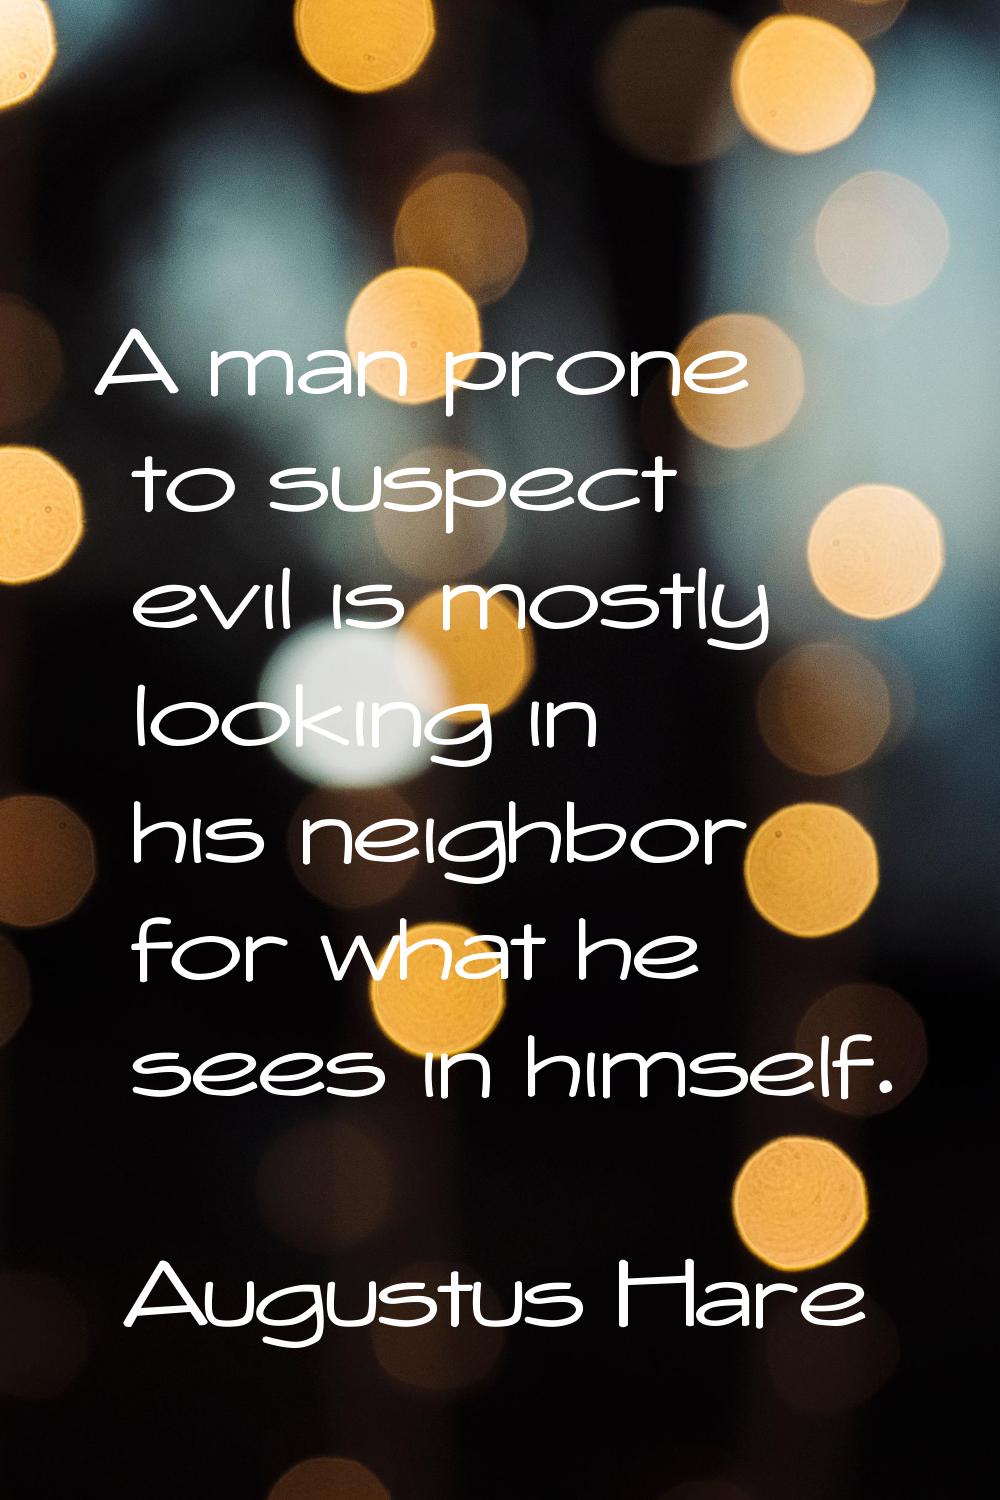 A man prone to suspect evil is mostly looking in his neighbor for what he sees in himself.